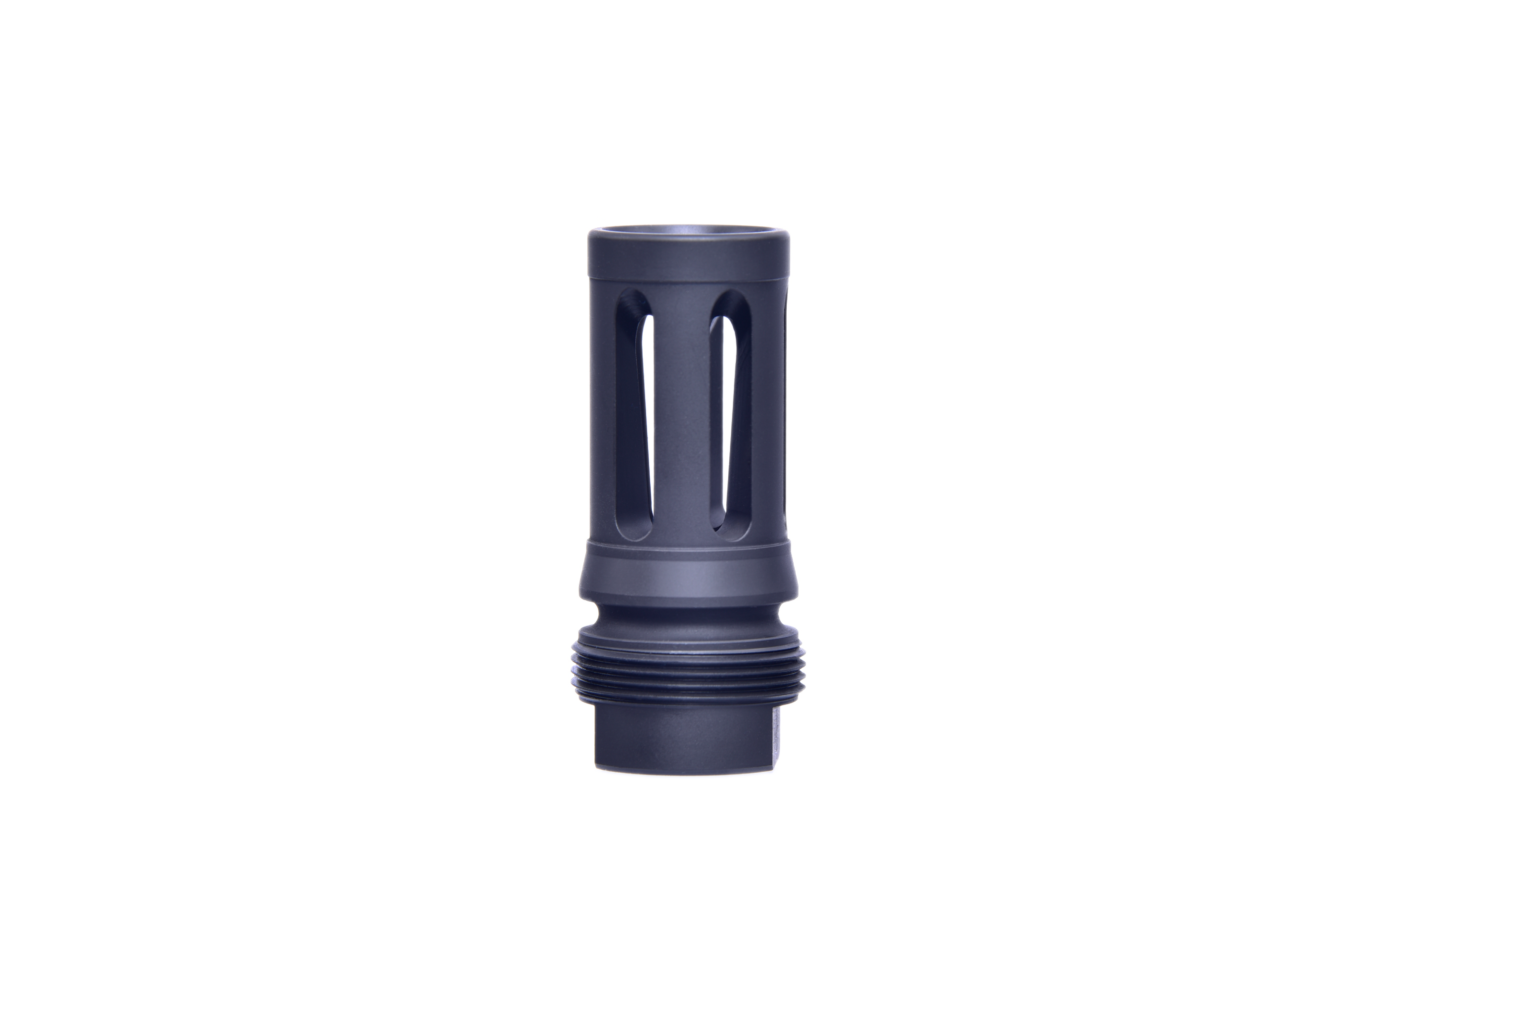 Closed Tine Flash Hider in 5/8×24 for 7.62